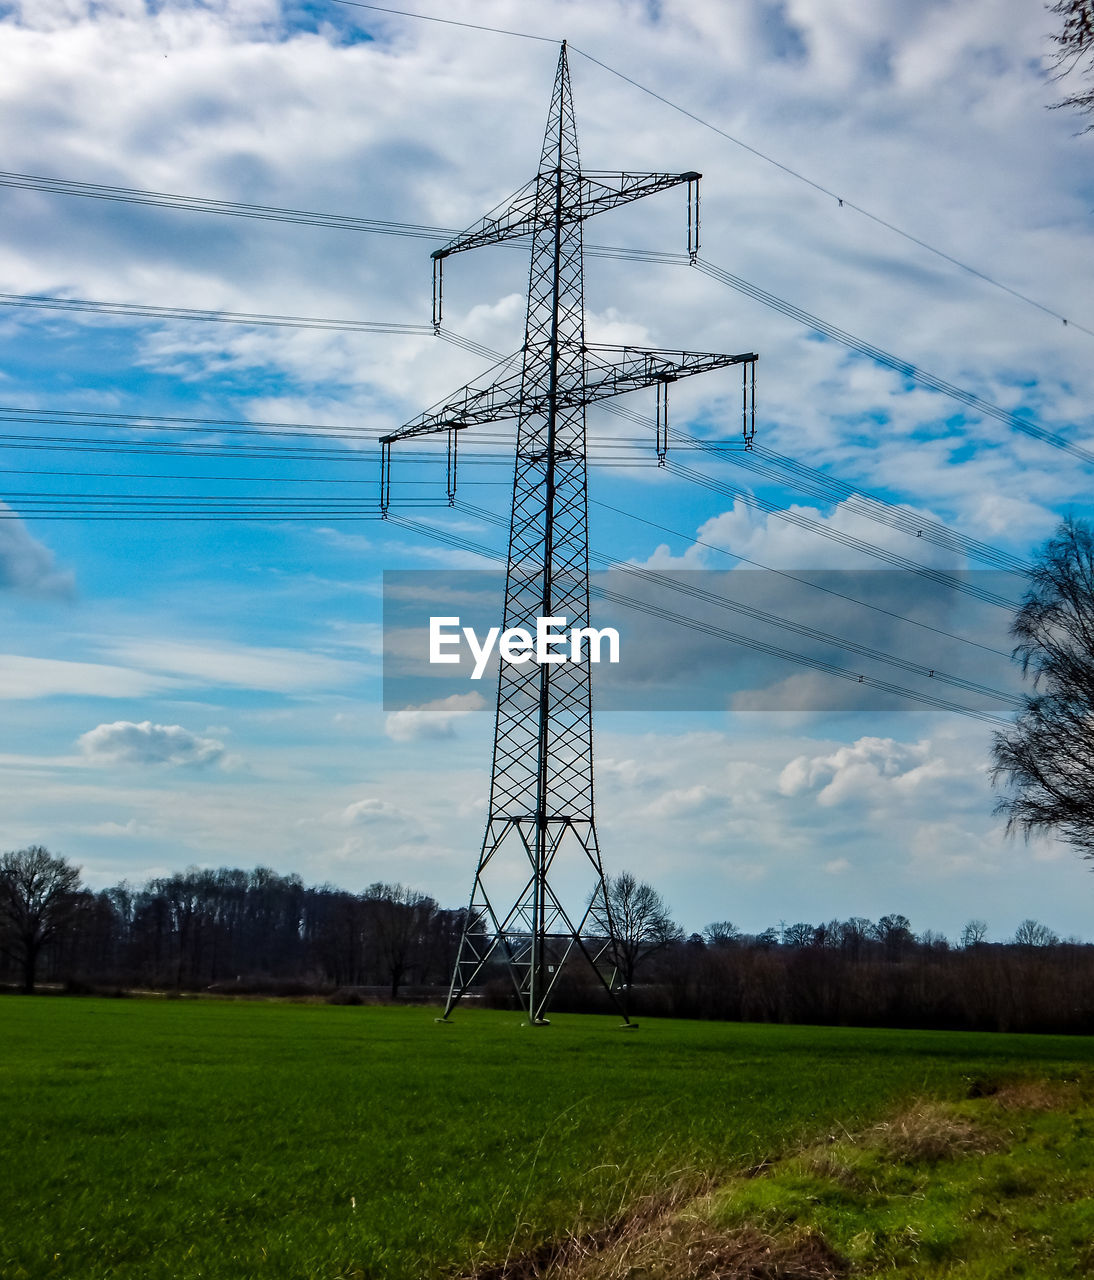 technology, electricity, sky, power generation, cloud, electricity pylon, cable, power supply, transmission tower, overhead power line, nature, plant, tower, power line, environment, landscape, no people, land, grass, field, wind, built structure, architecture, outdoors, rural scene, tree, agriculture, environmental conservation, day, scenics - nature, outdoor structure, renewable energy, electrical grid